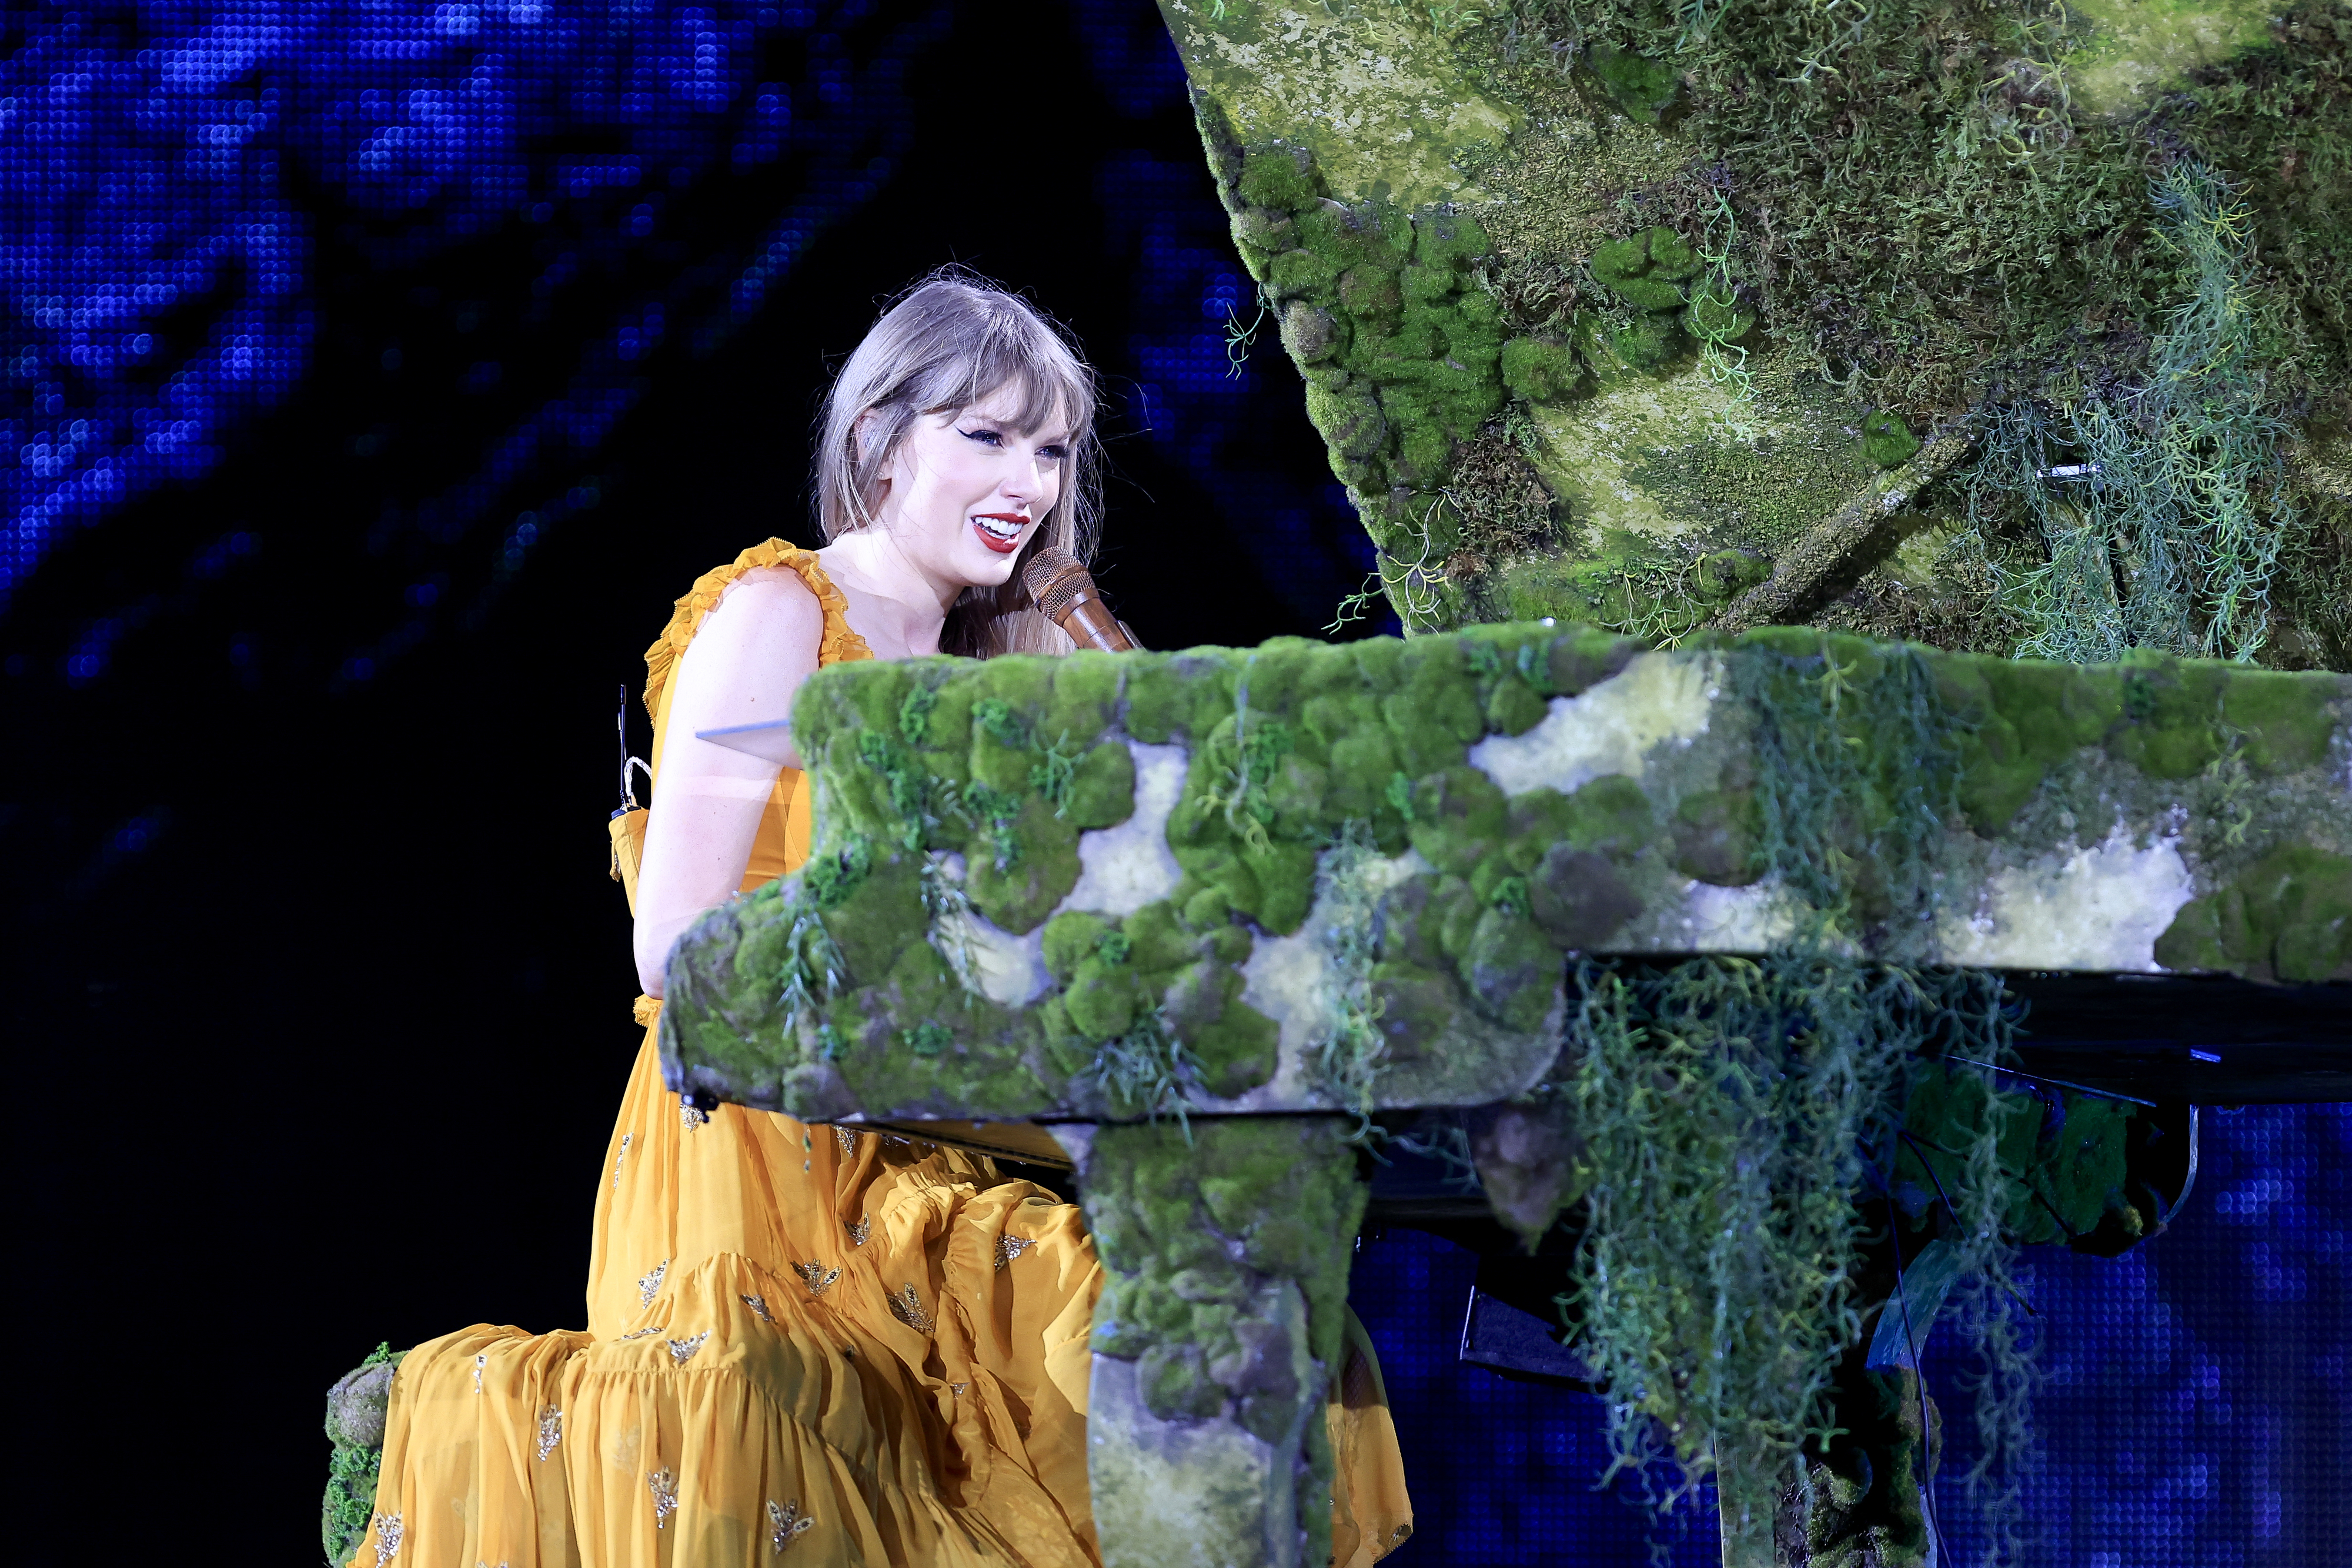 Taylor Swift at piano on stage with mossy decoration in a flowing dress